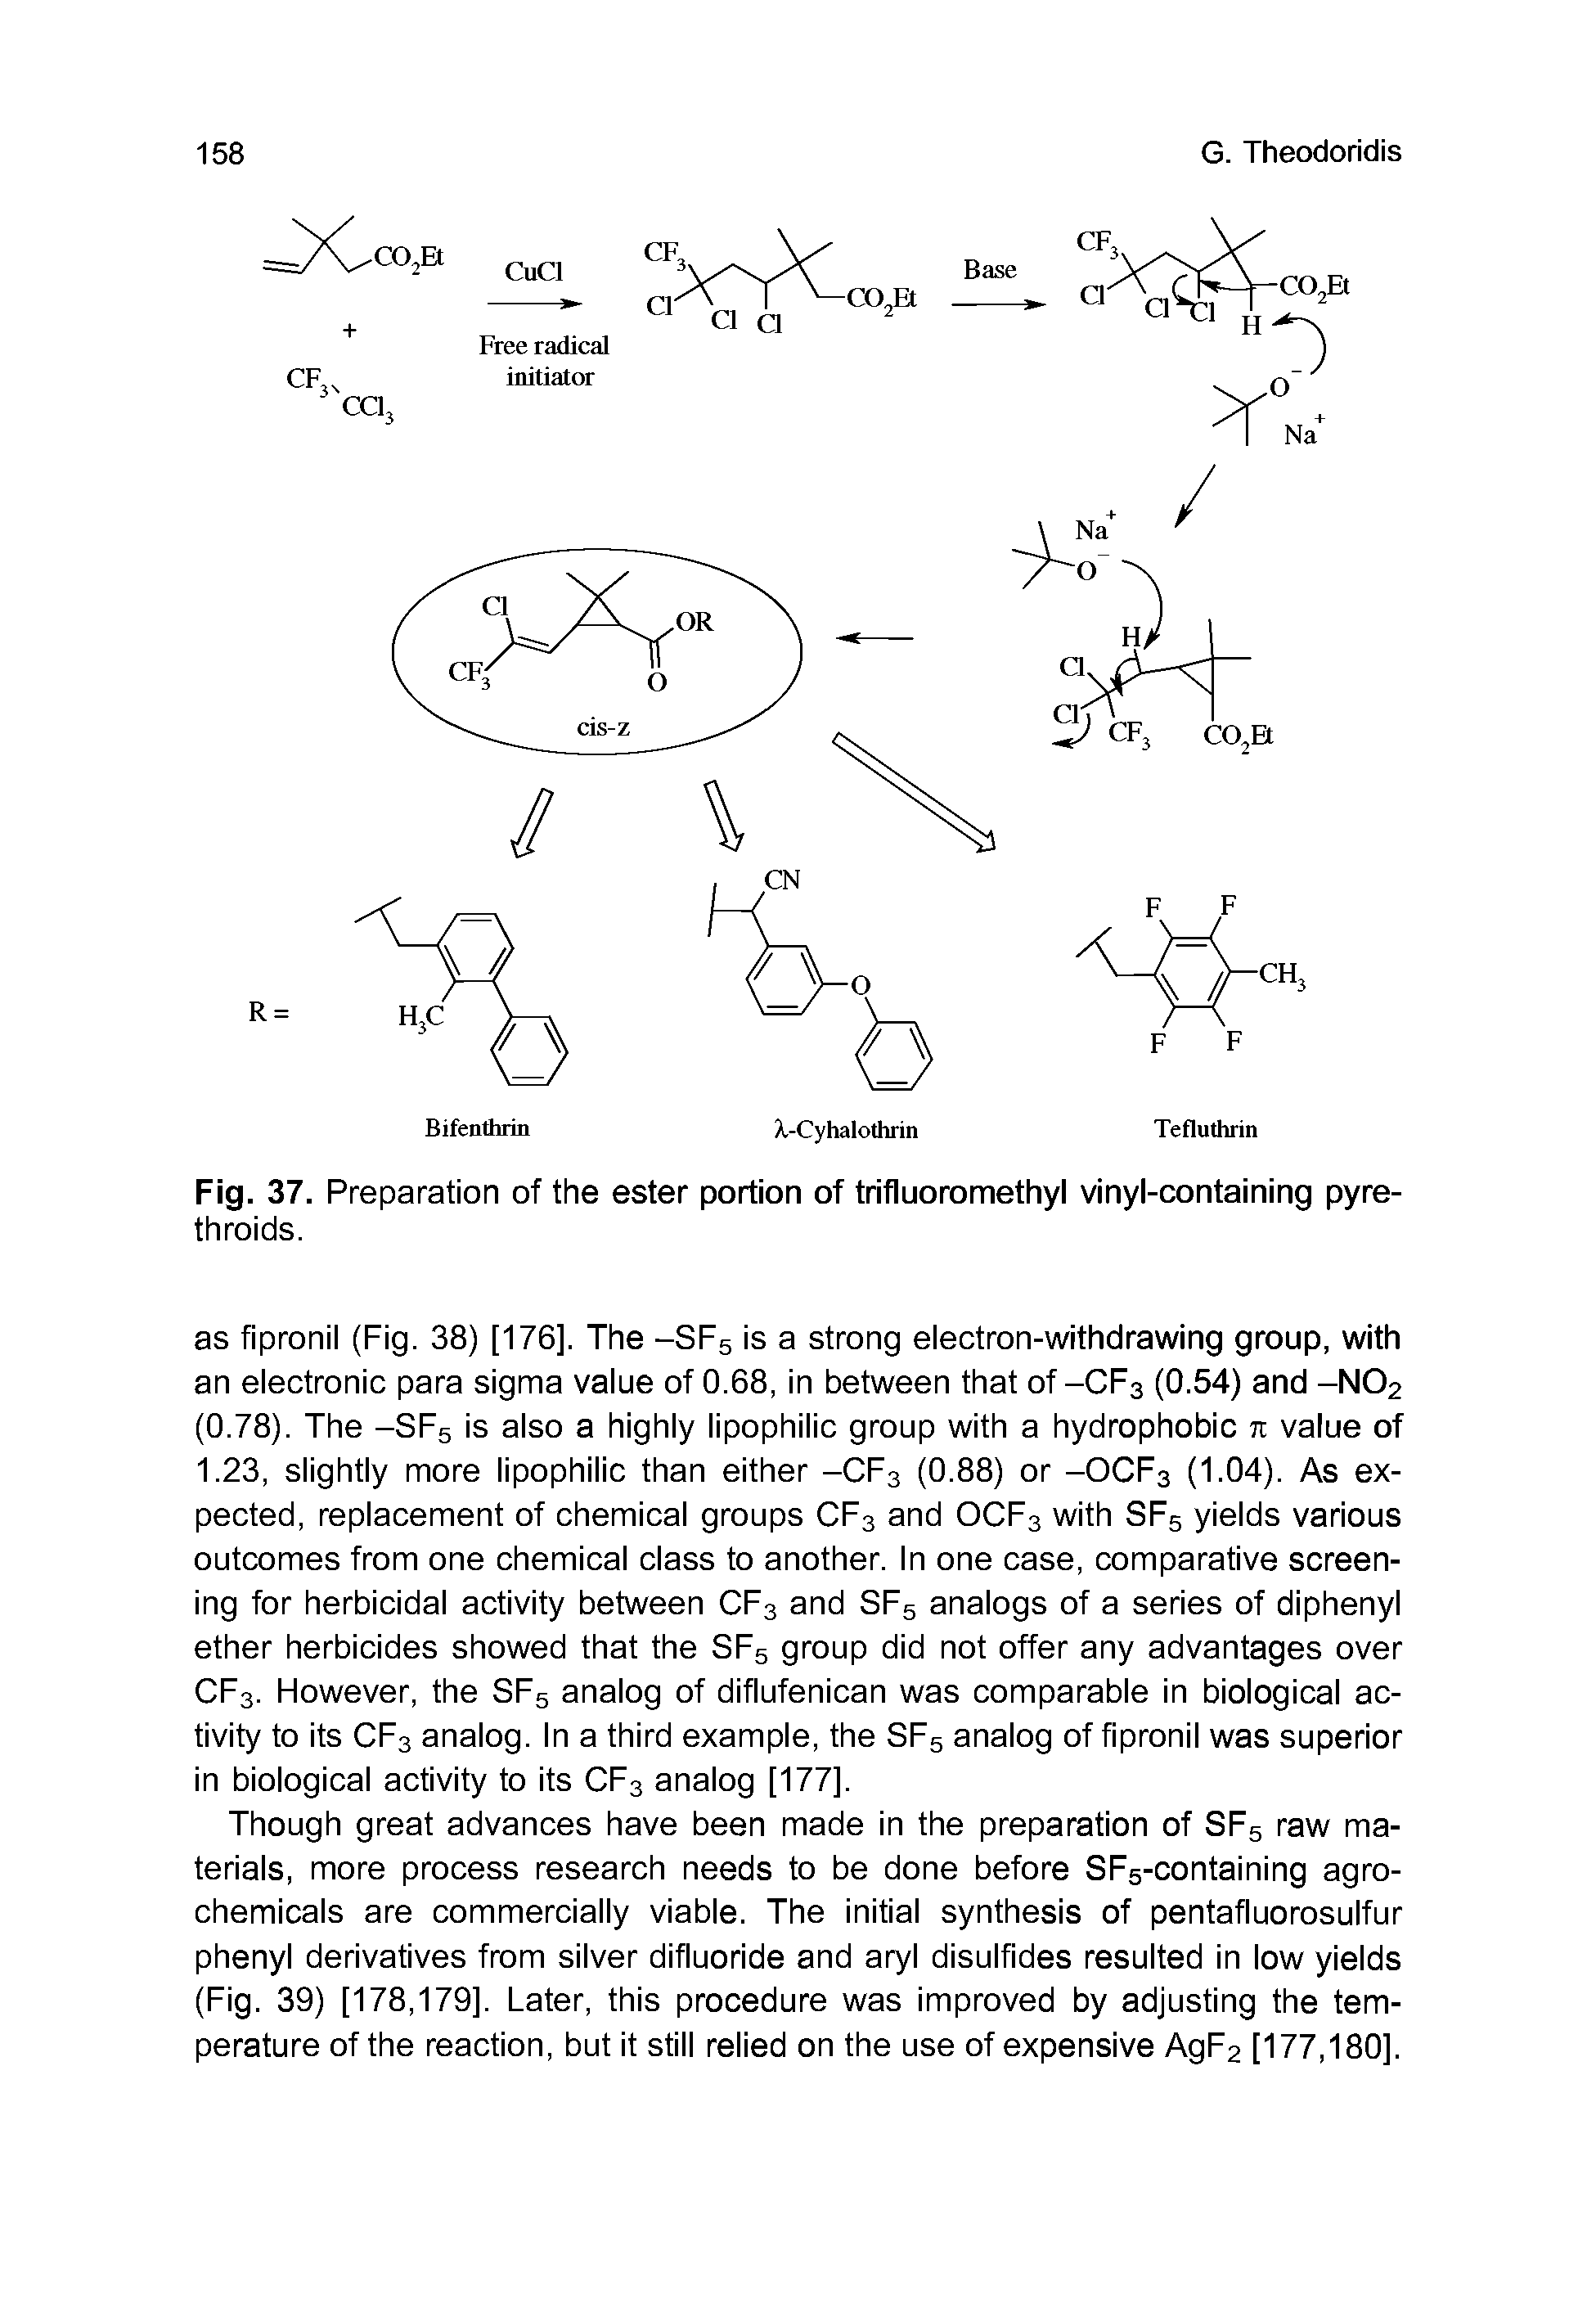 Fig. 37. Preparation of the ester portion of trifluoromethyl vinyl-containing pyre-throids.